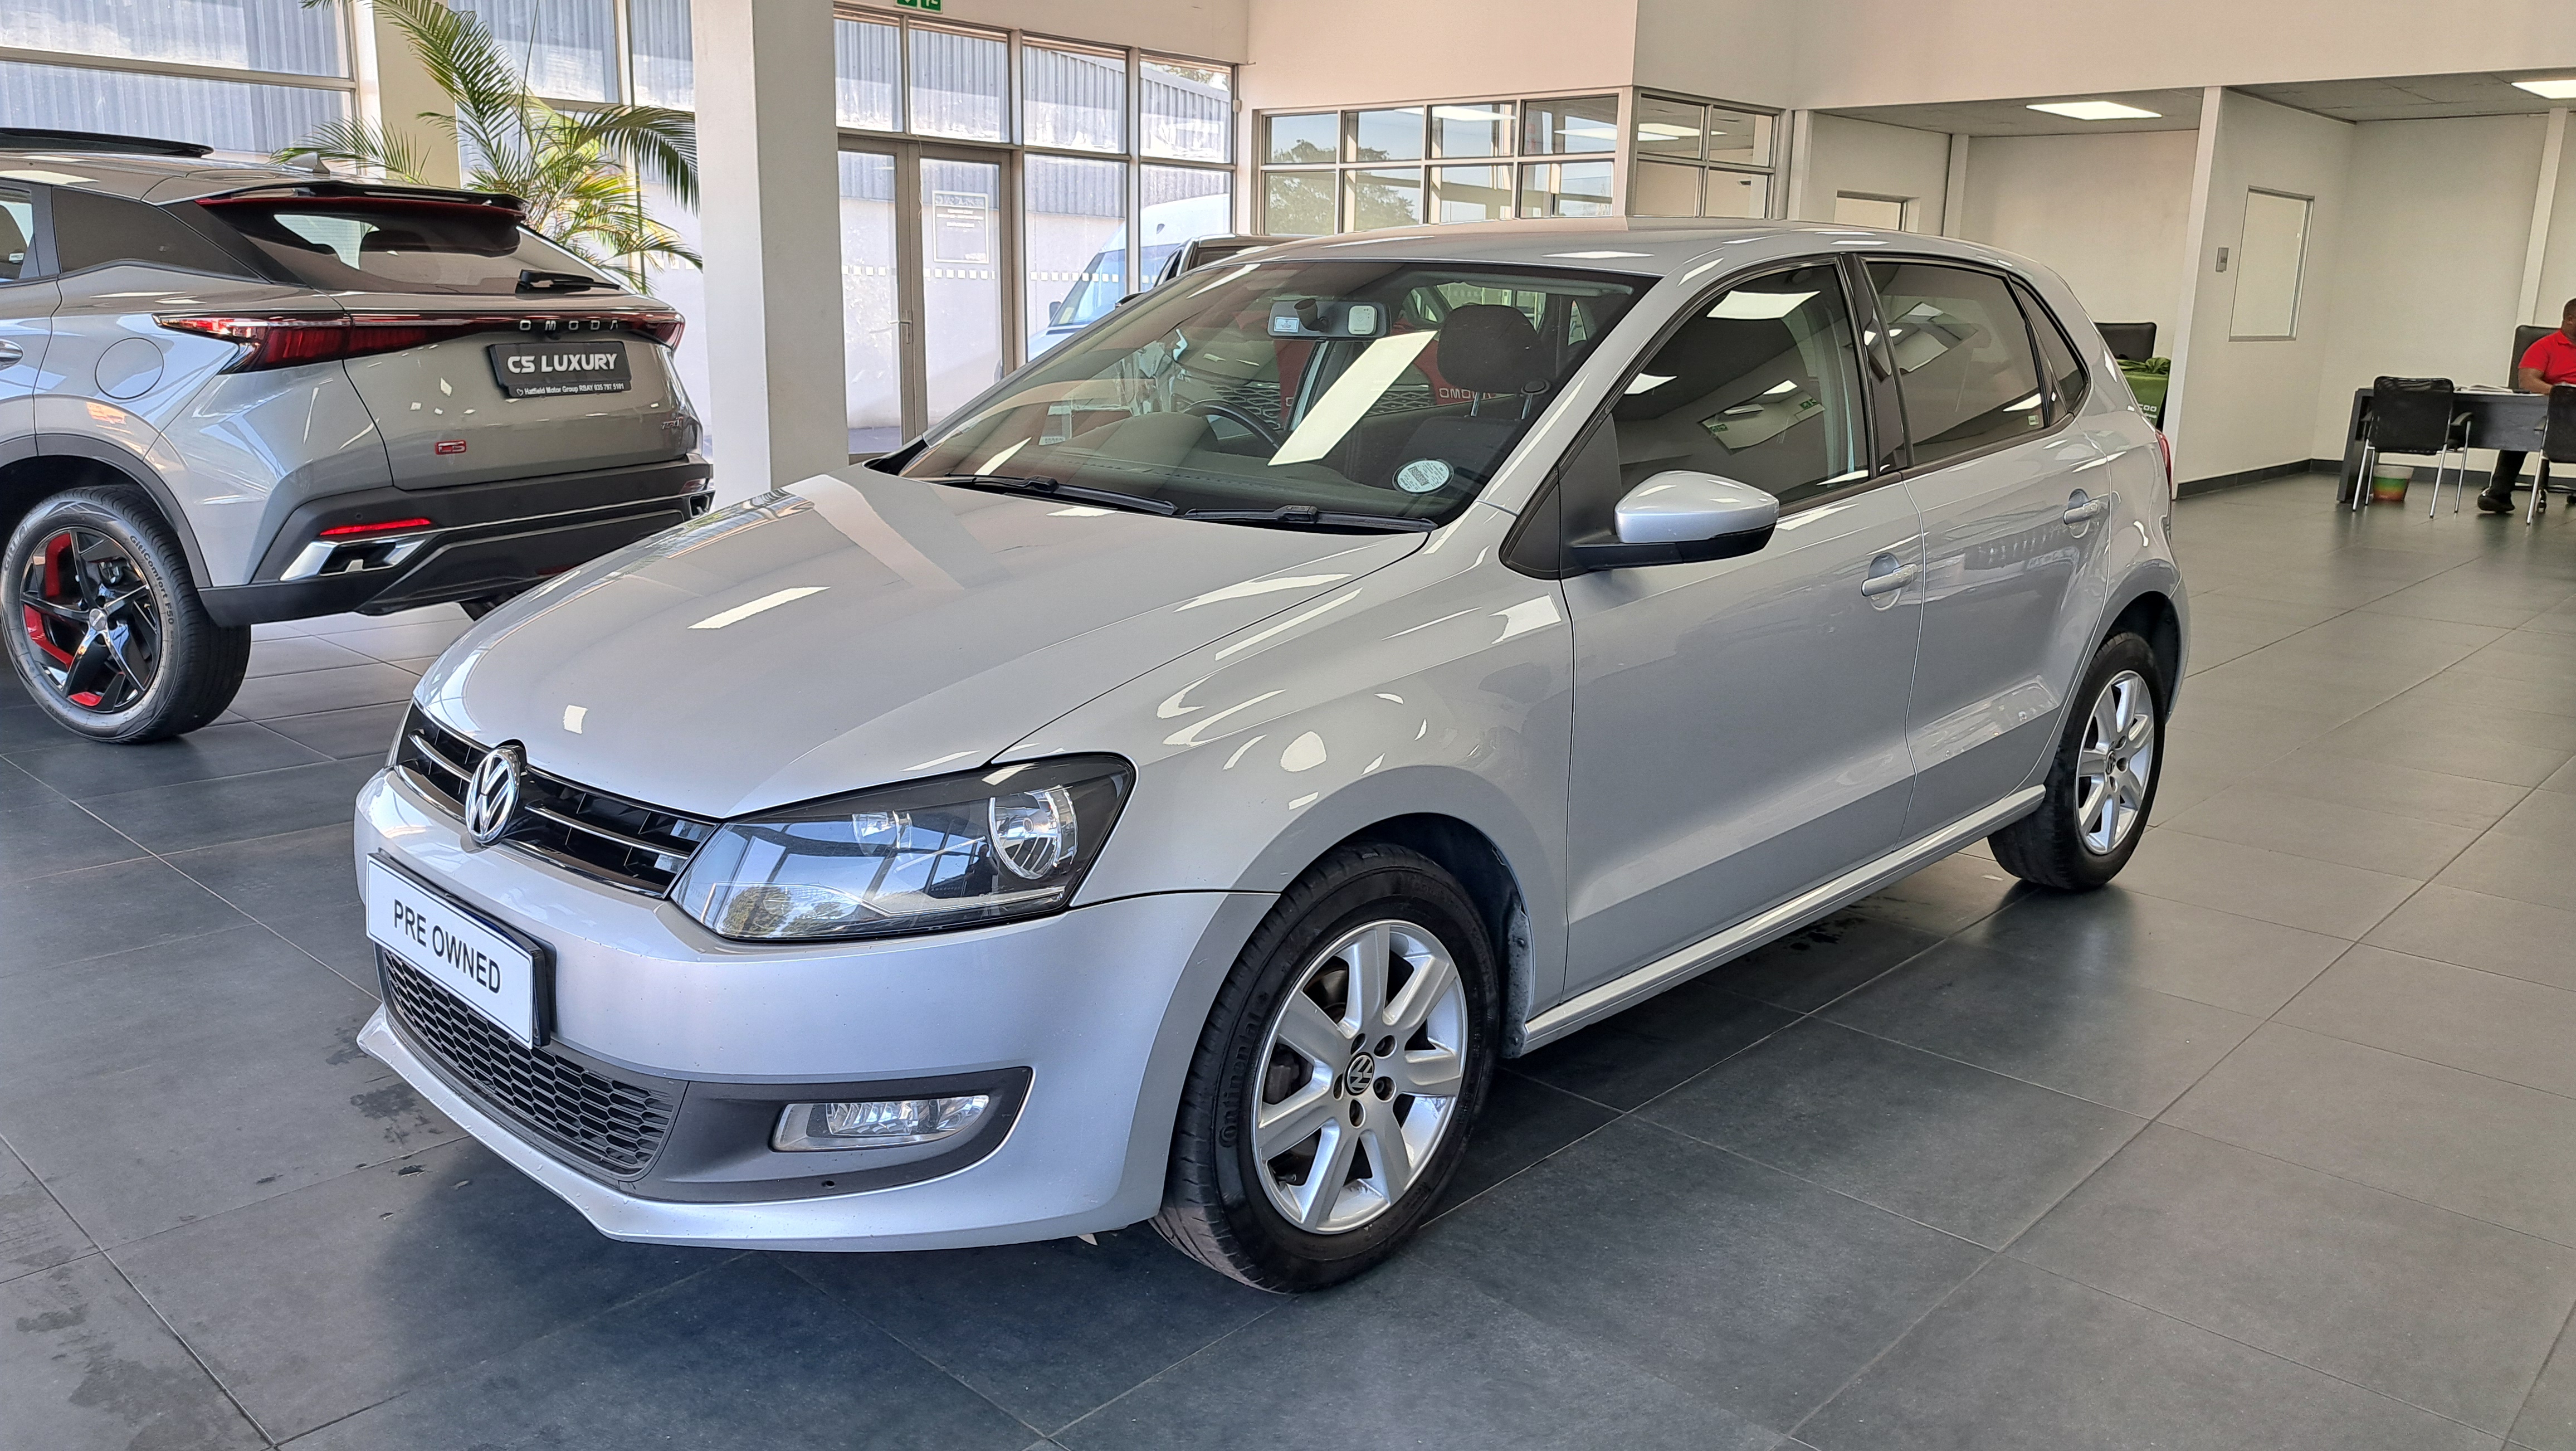 2014 Volkswagen Polo Hatch  for sale - UI70396